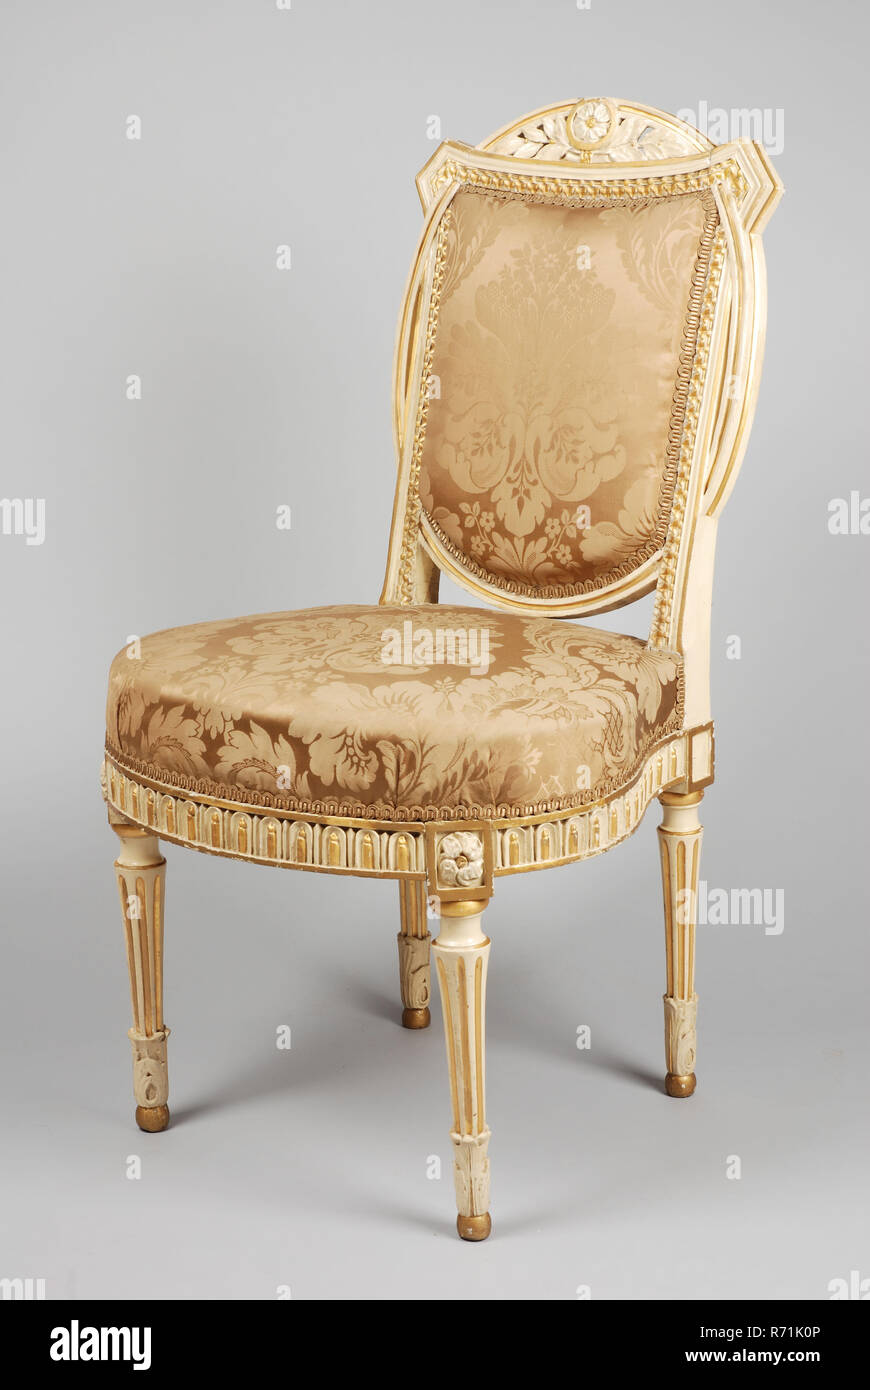 White Painted Partly Gilded Louis Seize Chair Chair Furniture